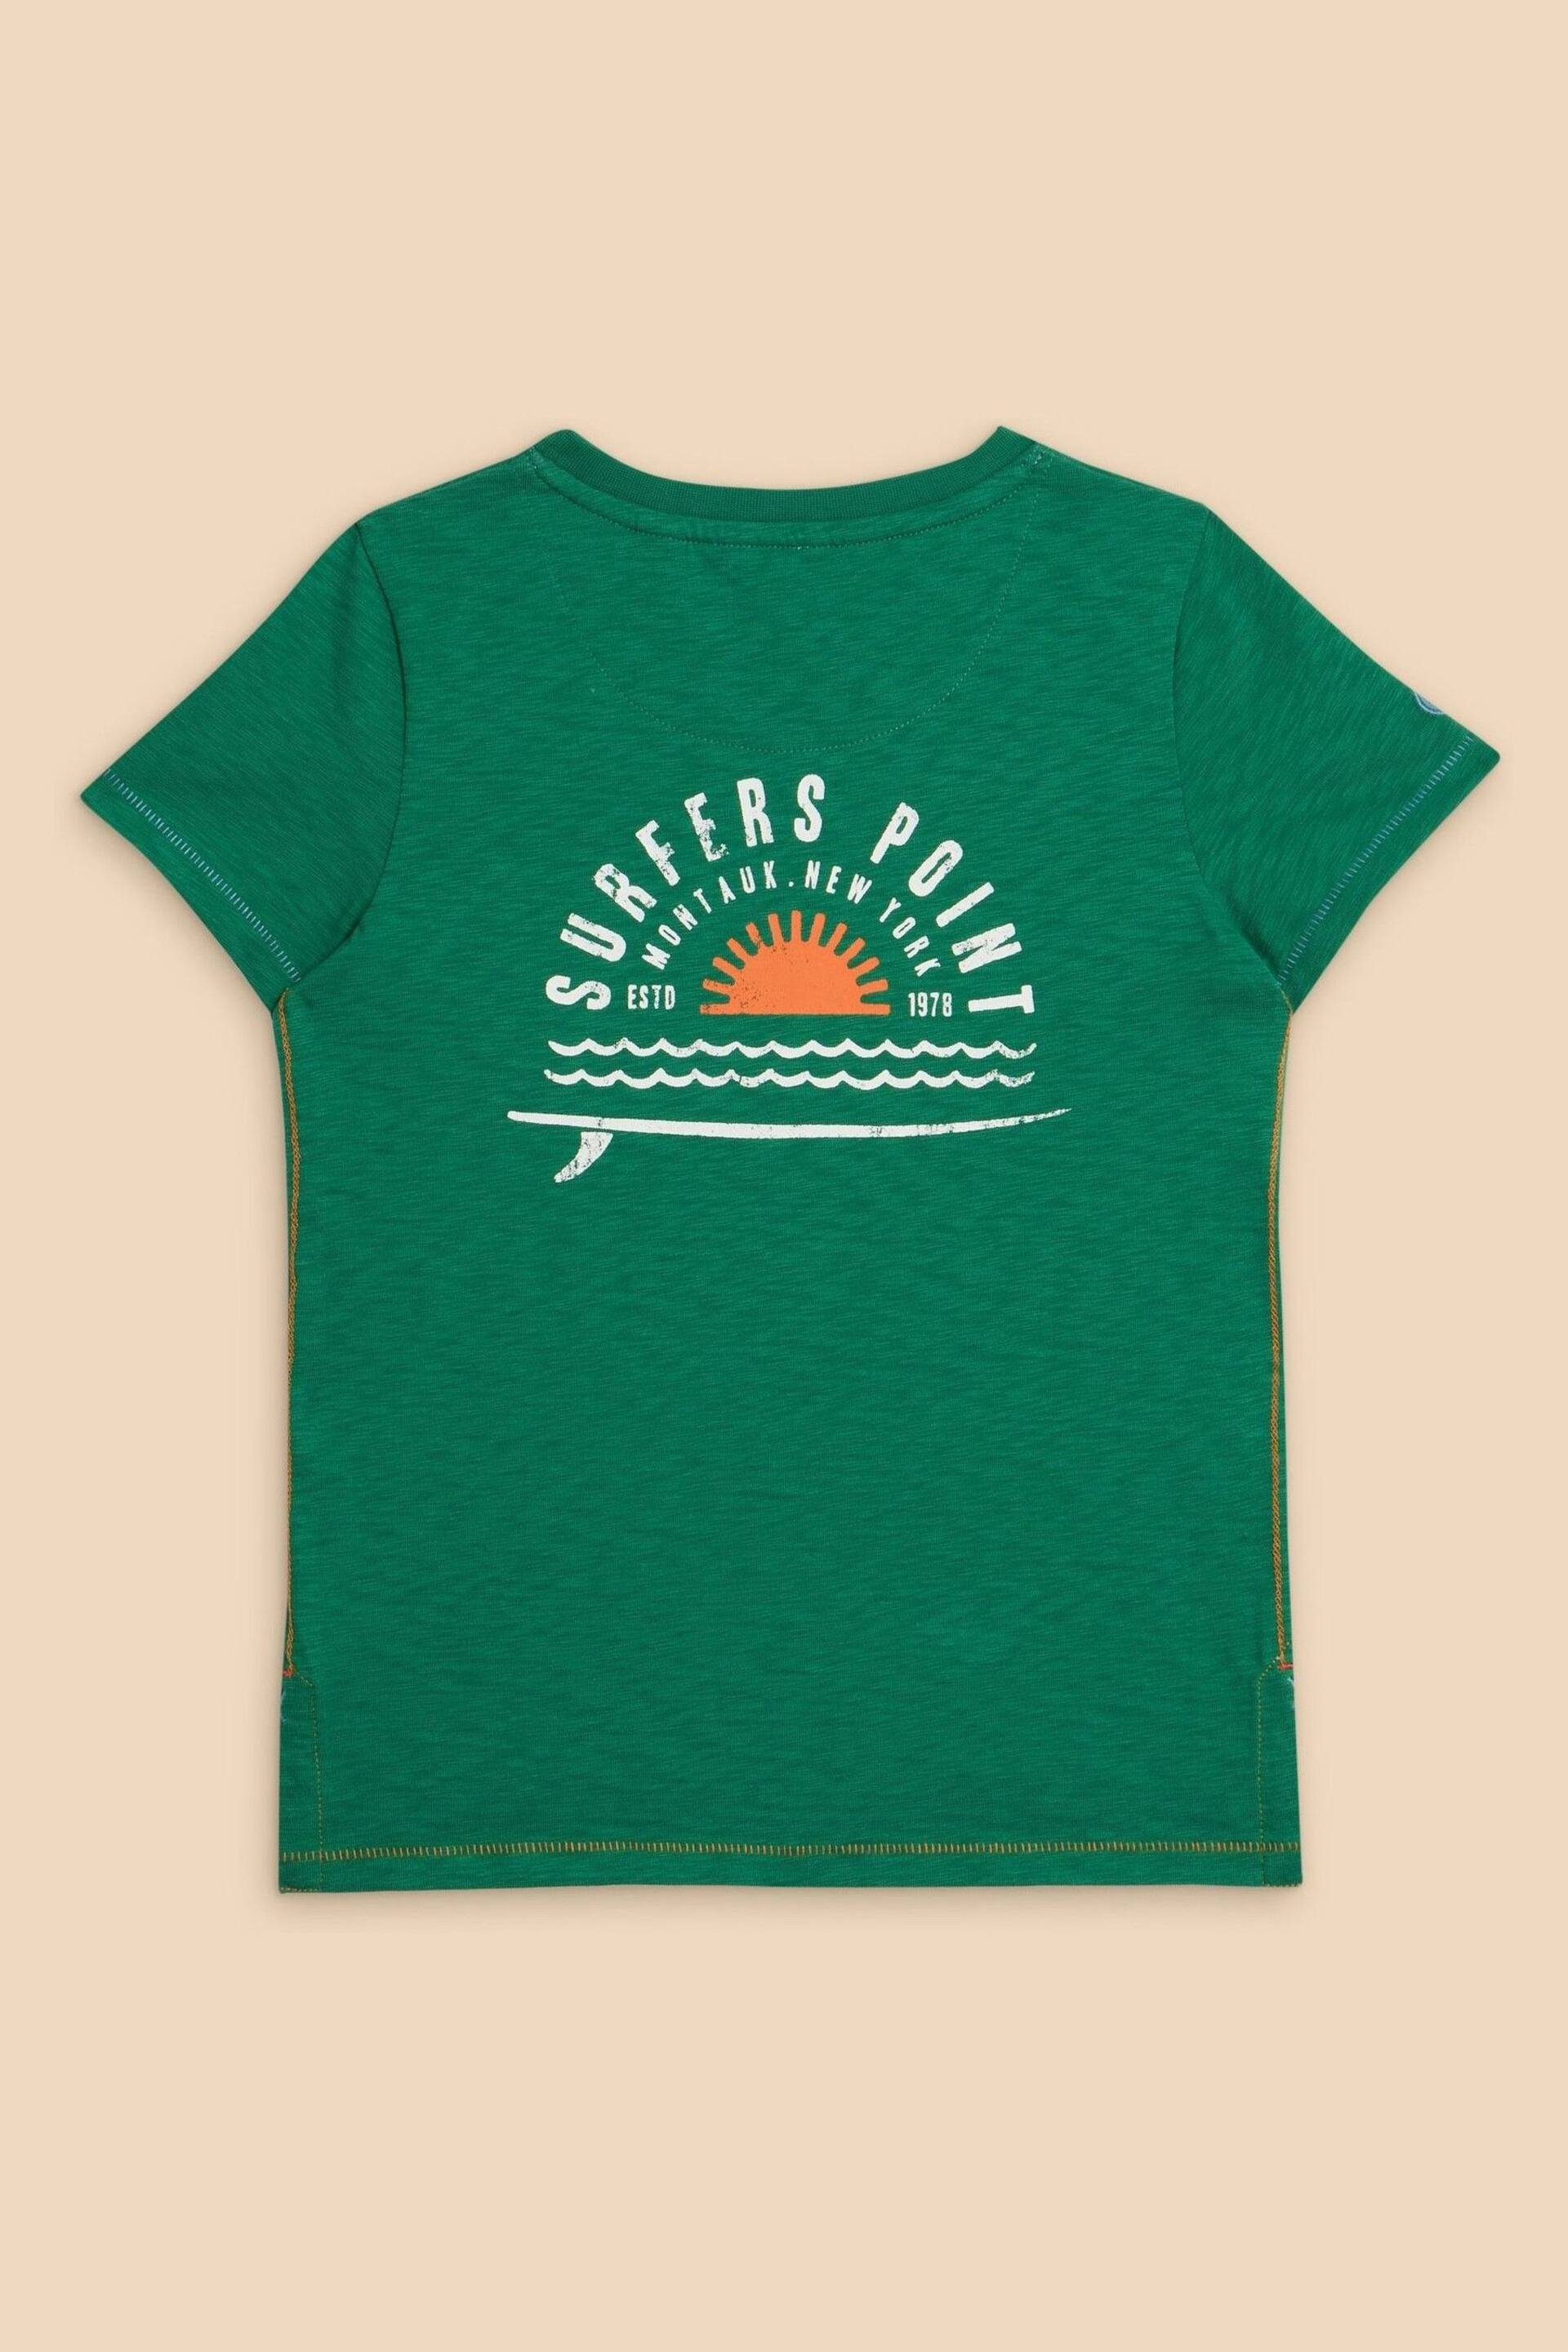 White Stuff Green Surfers Point Graphic T-Shirt - Image 1 of 3